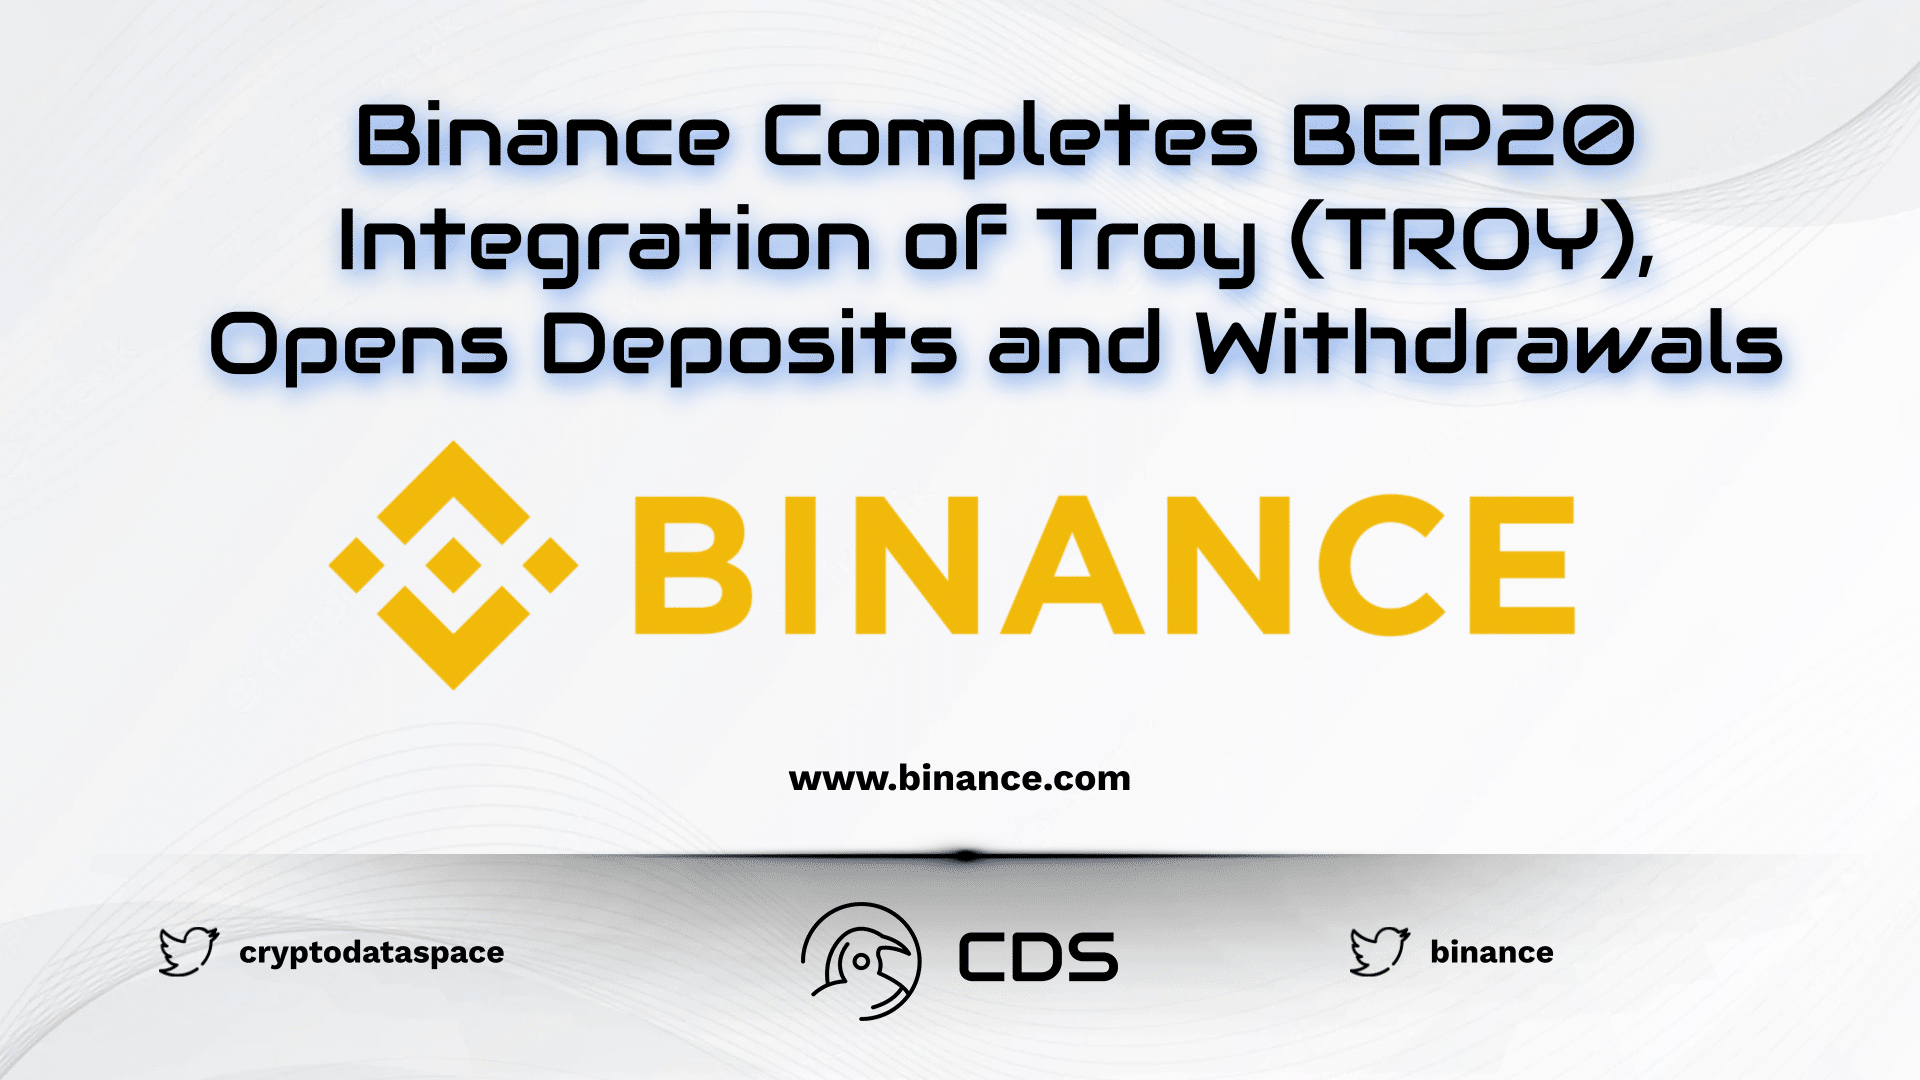 Binance Completes BEP20 Integration of Troy (TROY), Opens Deposits and Withdrawals